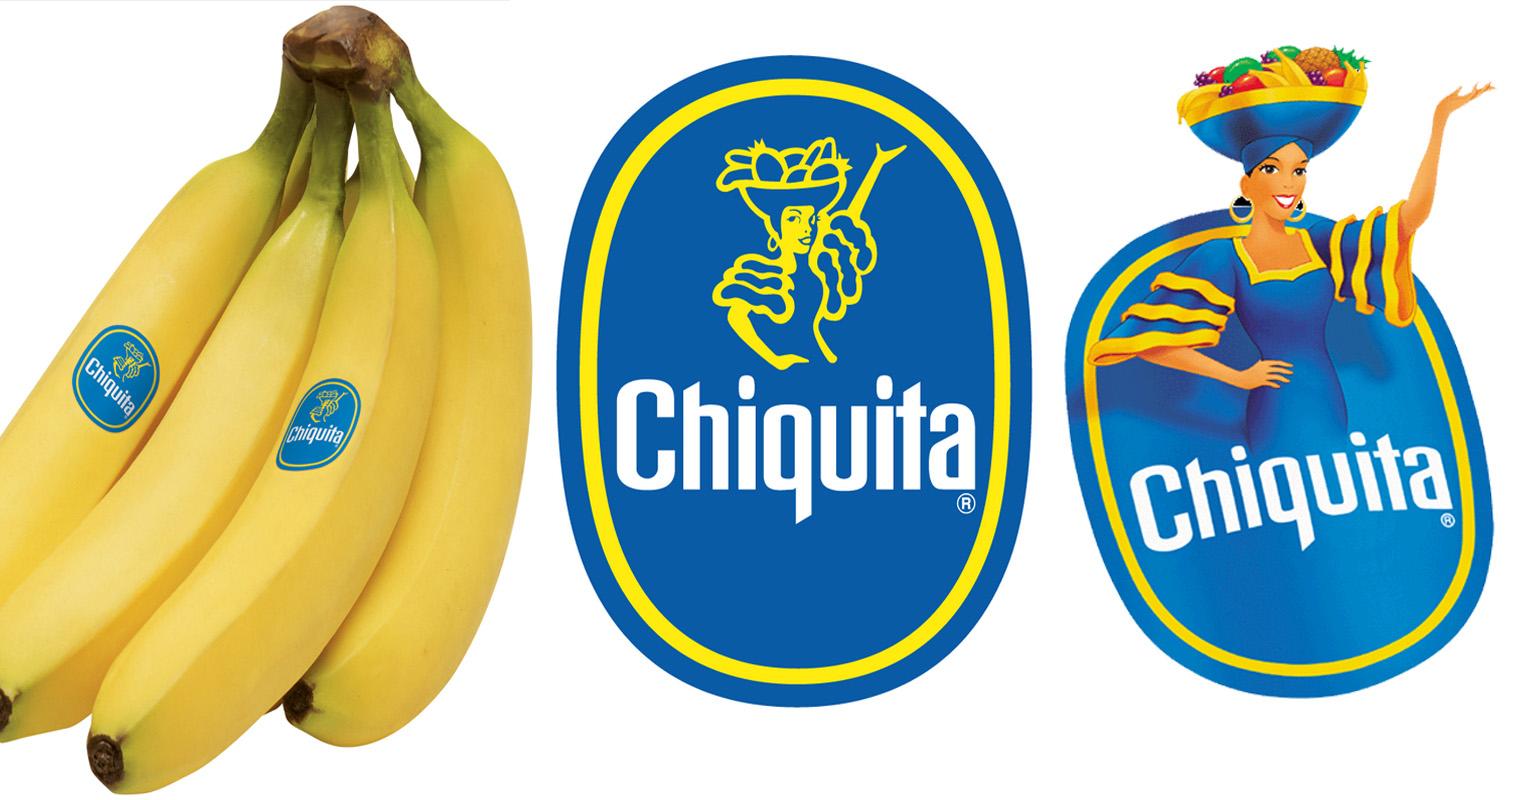 Chicta Logo - 12 Racist Logos You Didn't Know Were Used by Popular Brands